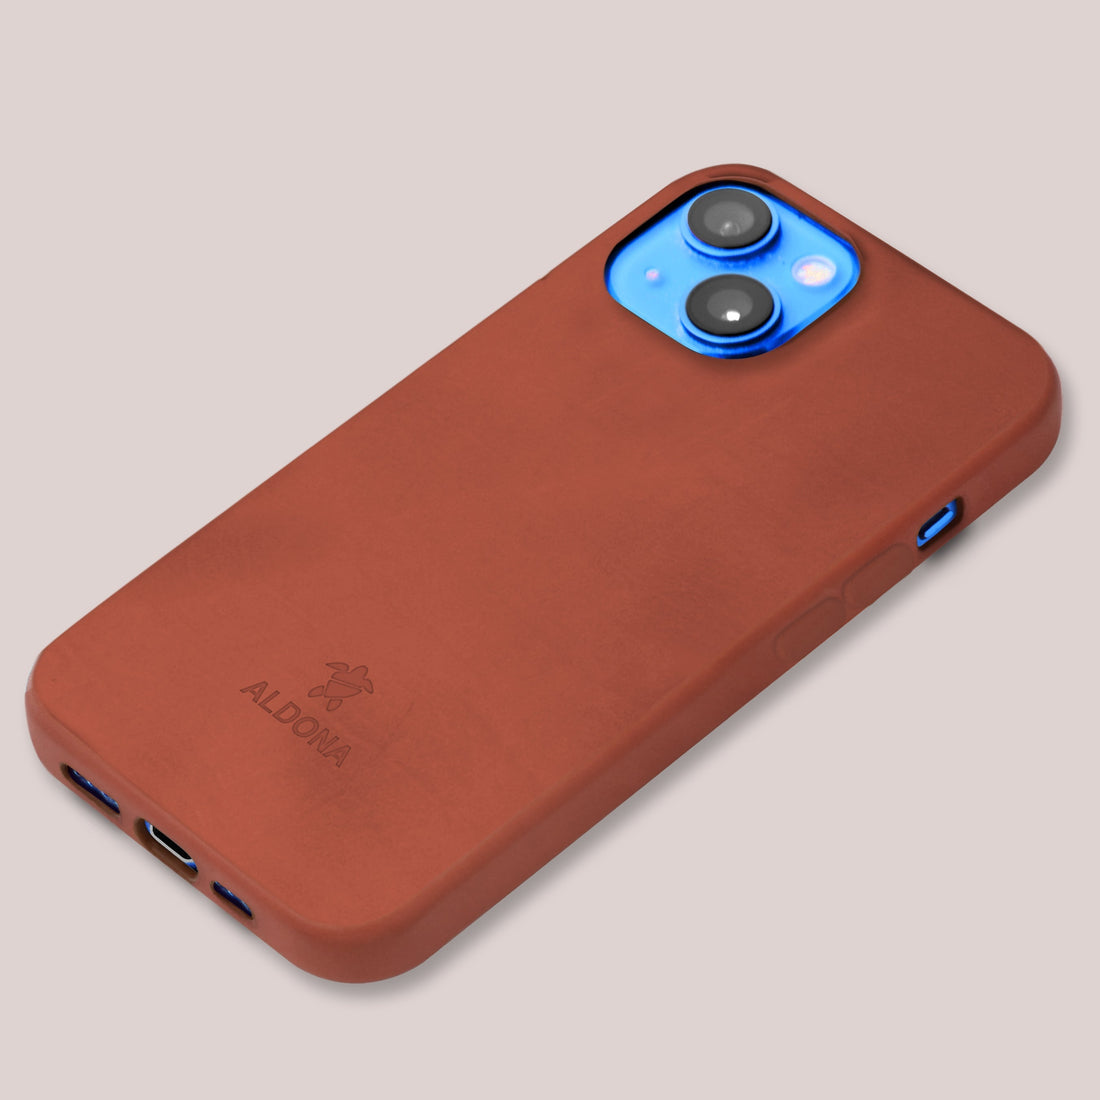 Kalon Case for iPhone 12 Mini series with MagSafe Compatibility - Burnt Tobacco